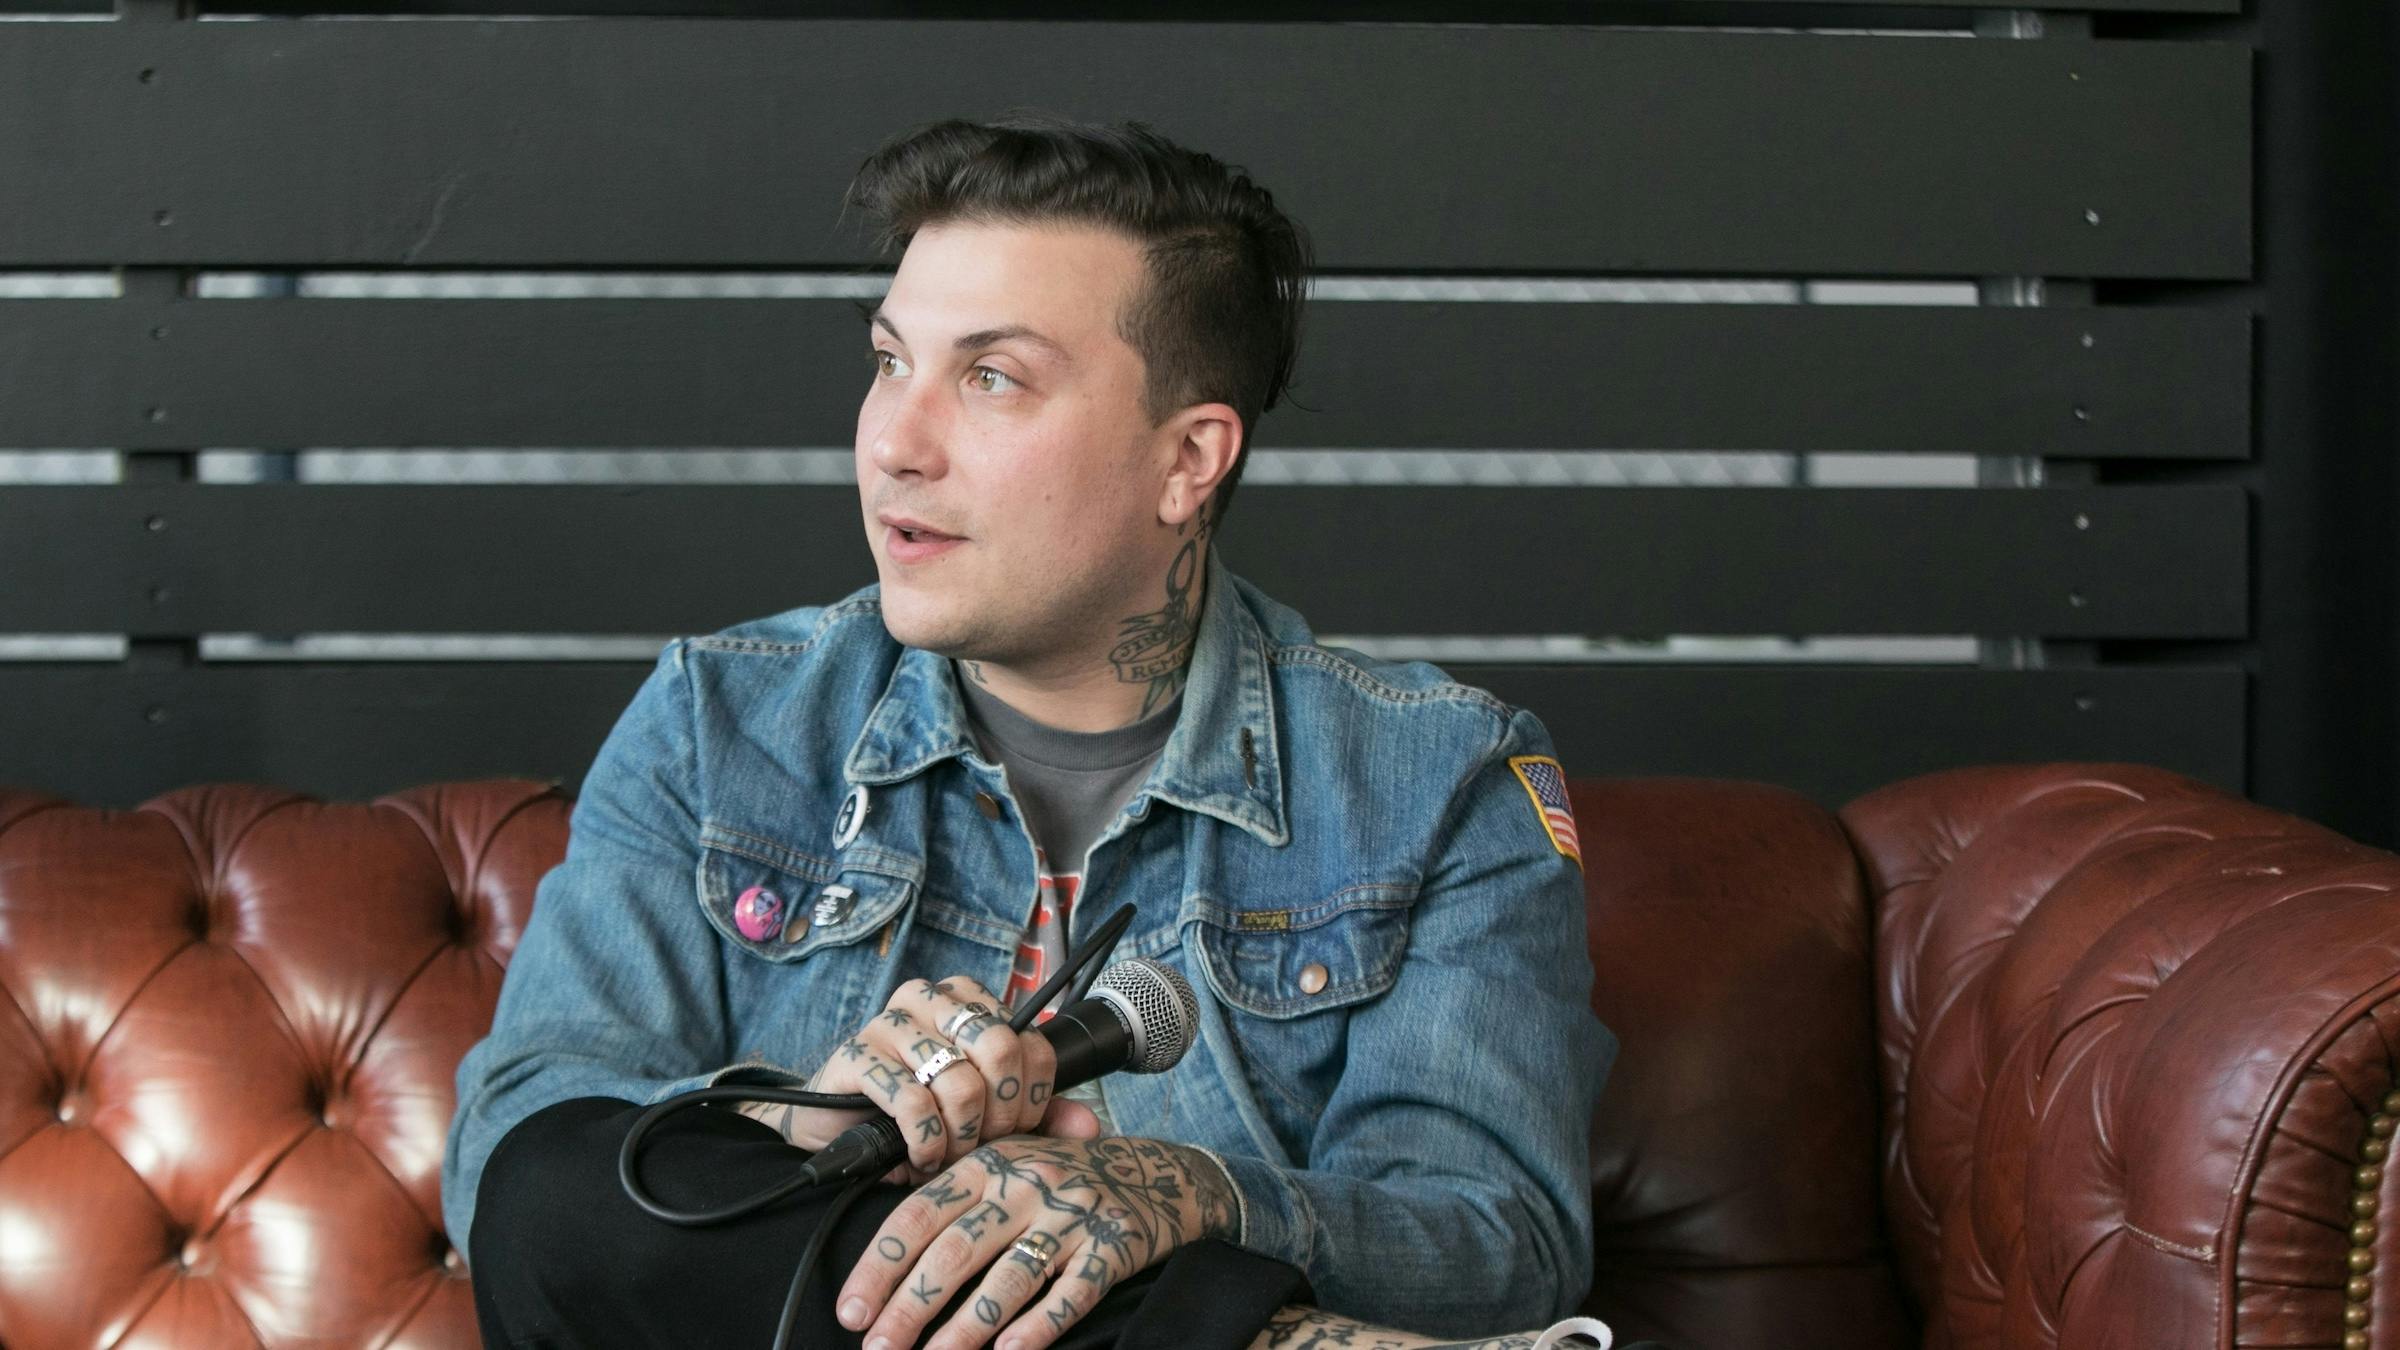 If Frank Iero Could Only Play One Of His Songs For The Rest Of His Life, What Would It Be?